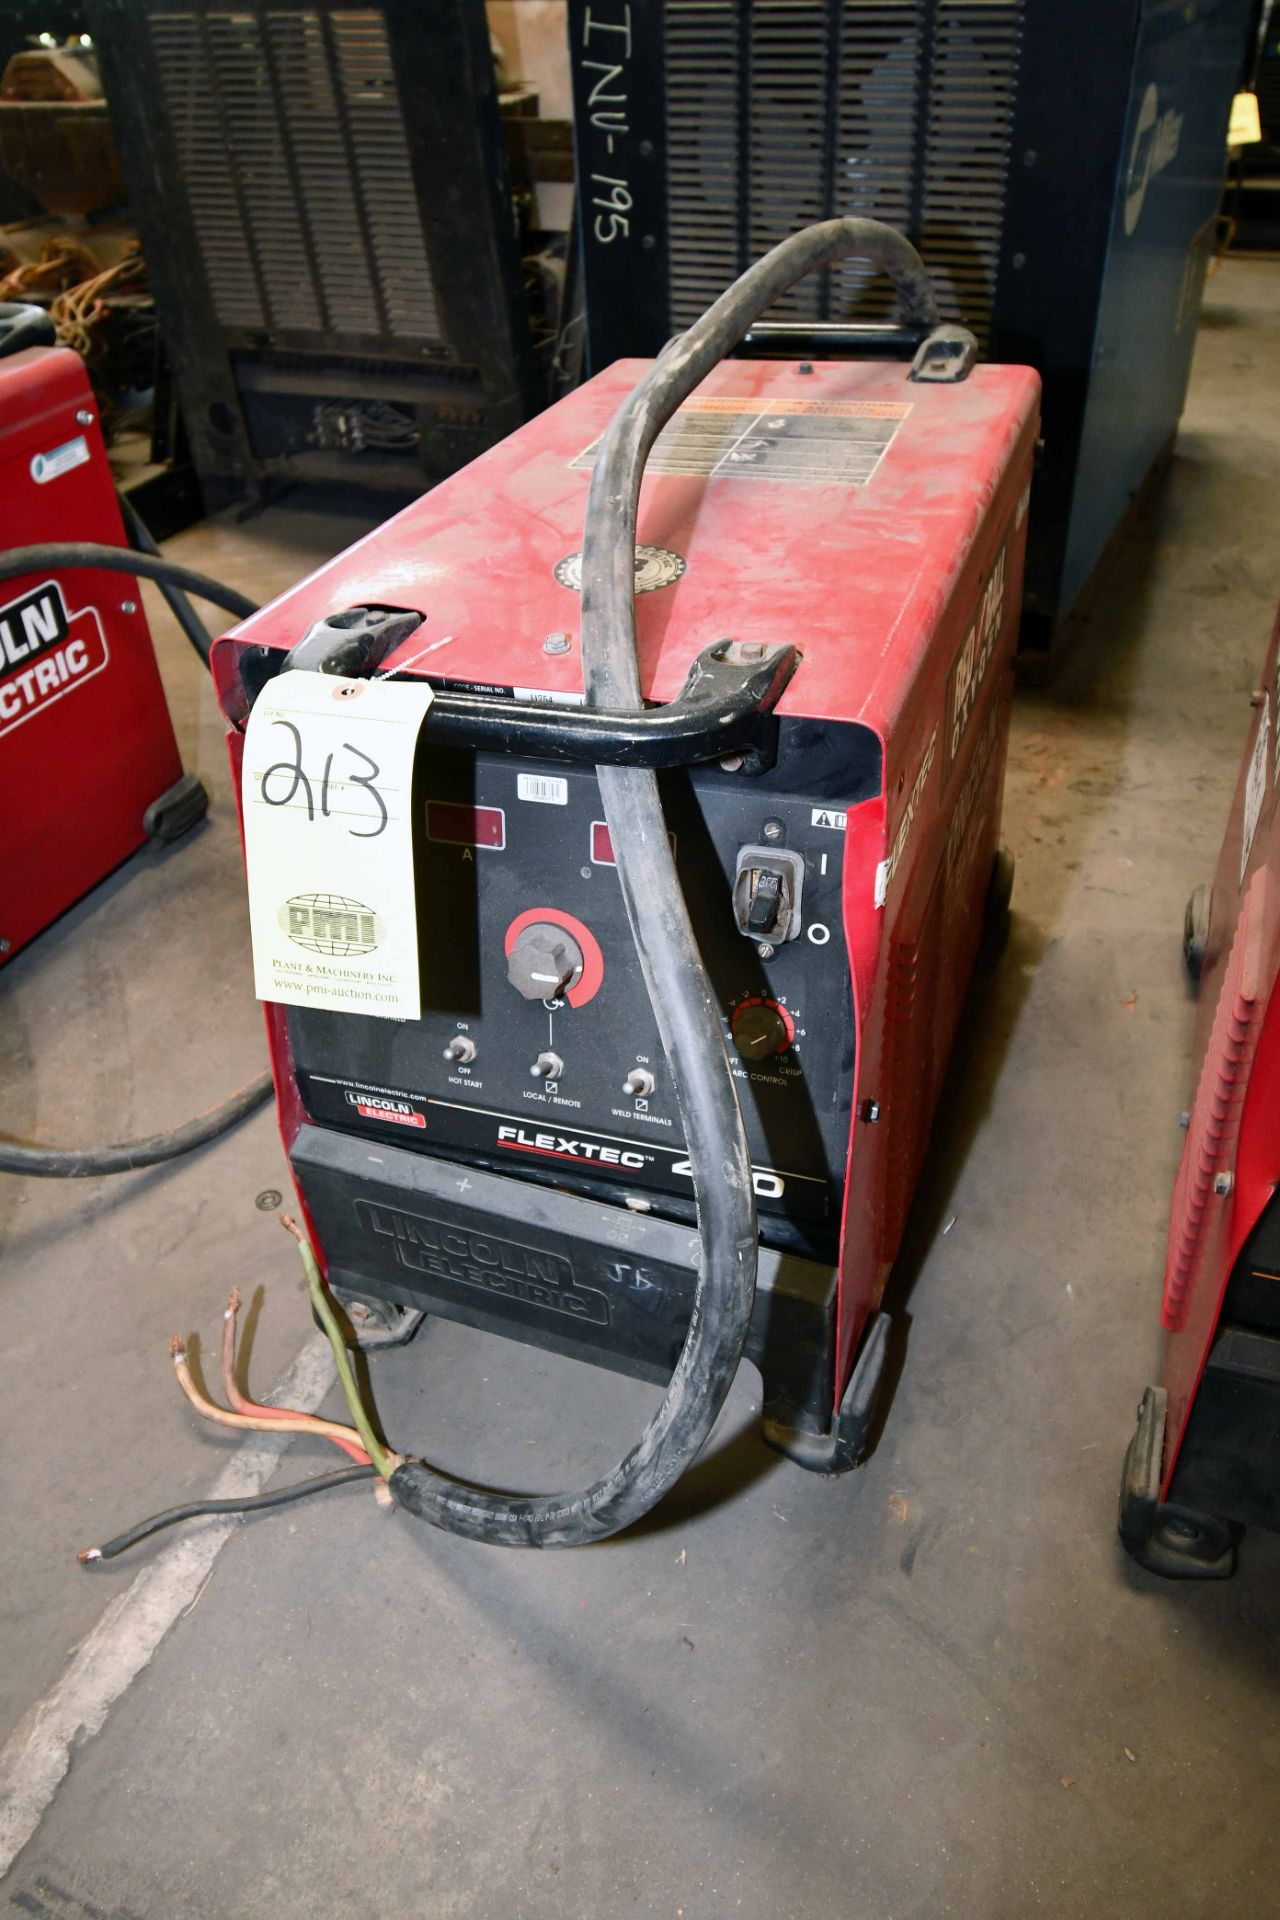 WELDING POWER SOURCE, LINCOLN FLEXTEC 450, new 2013, 34 v., 400 amp @ 100% duty cycle, S/N